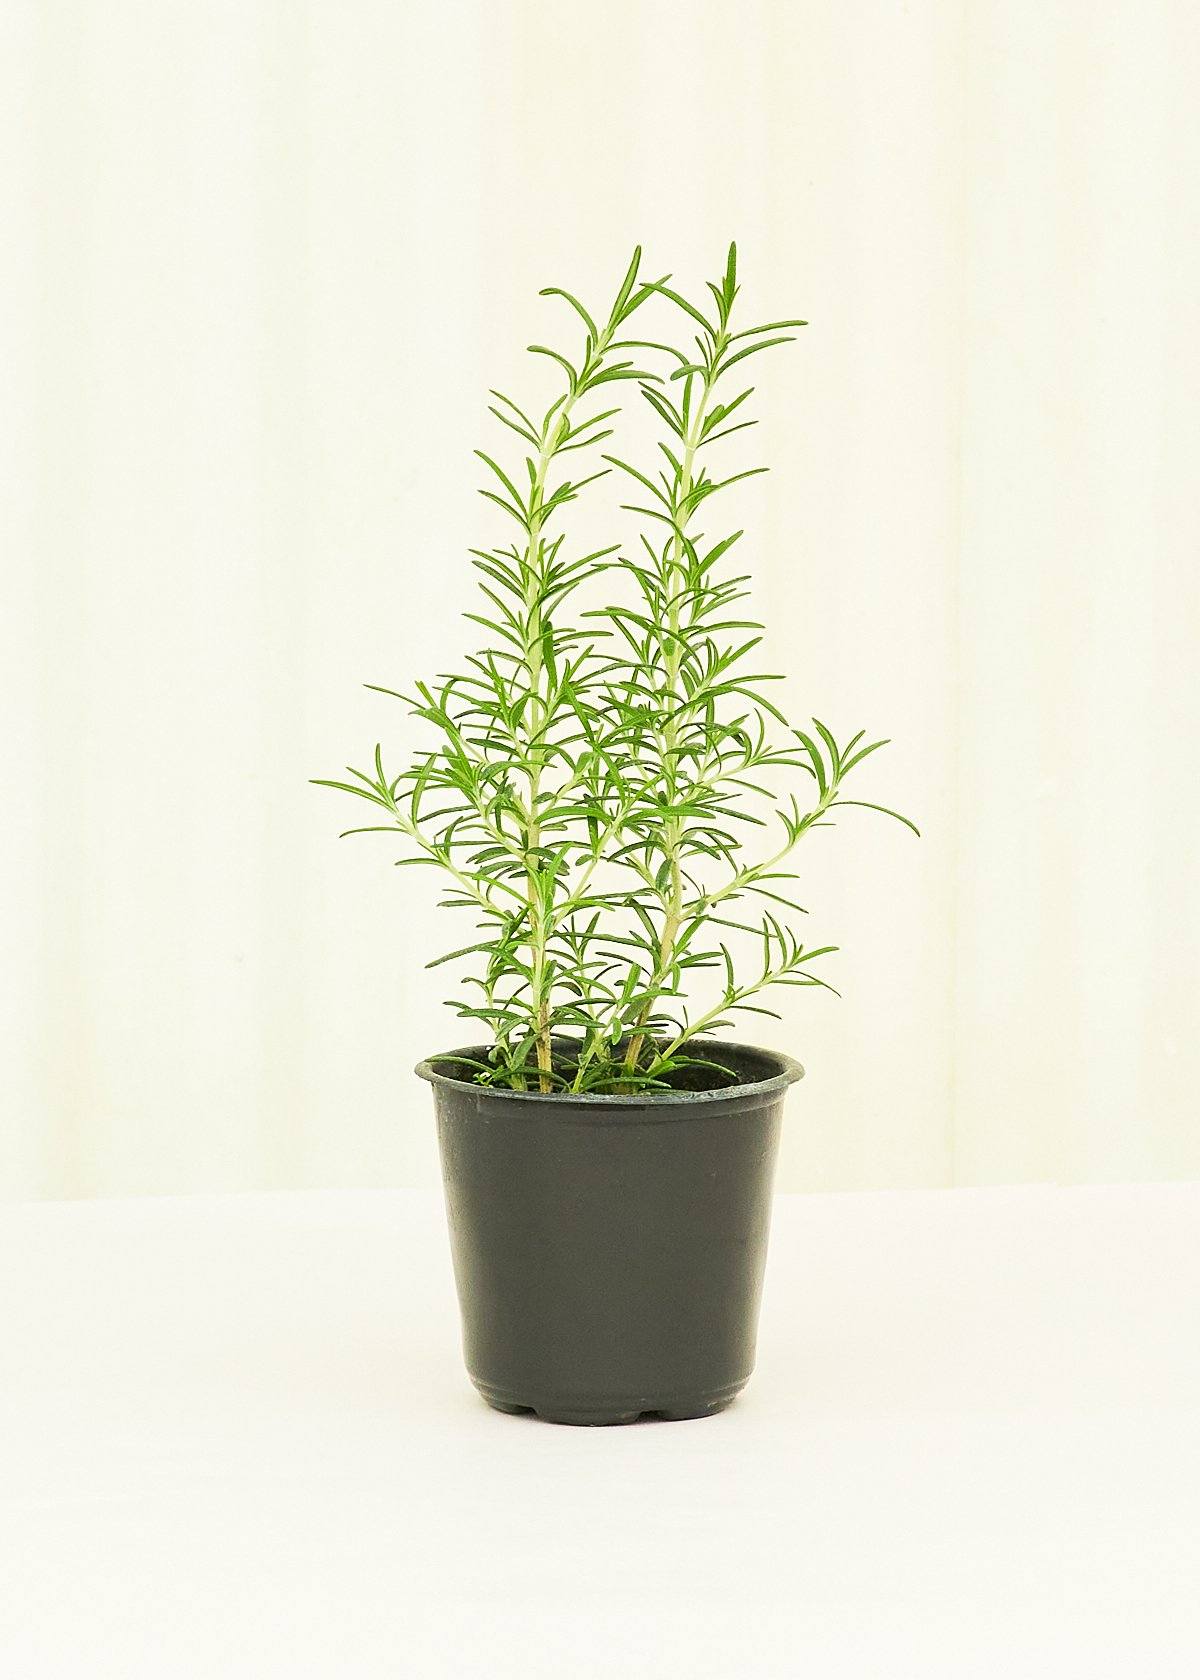 Rosemary 4-Pack Plant Rooted 